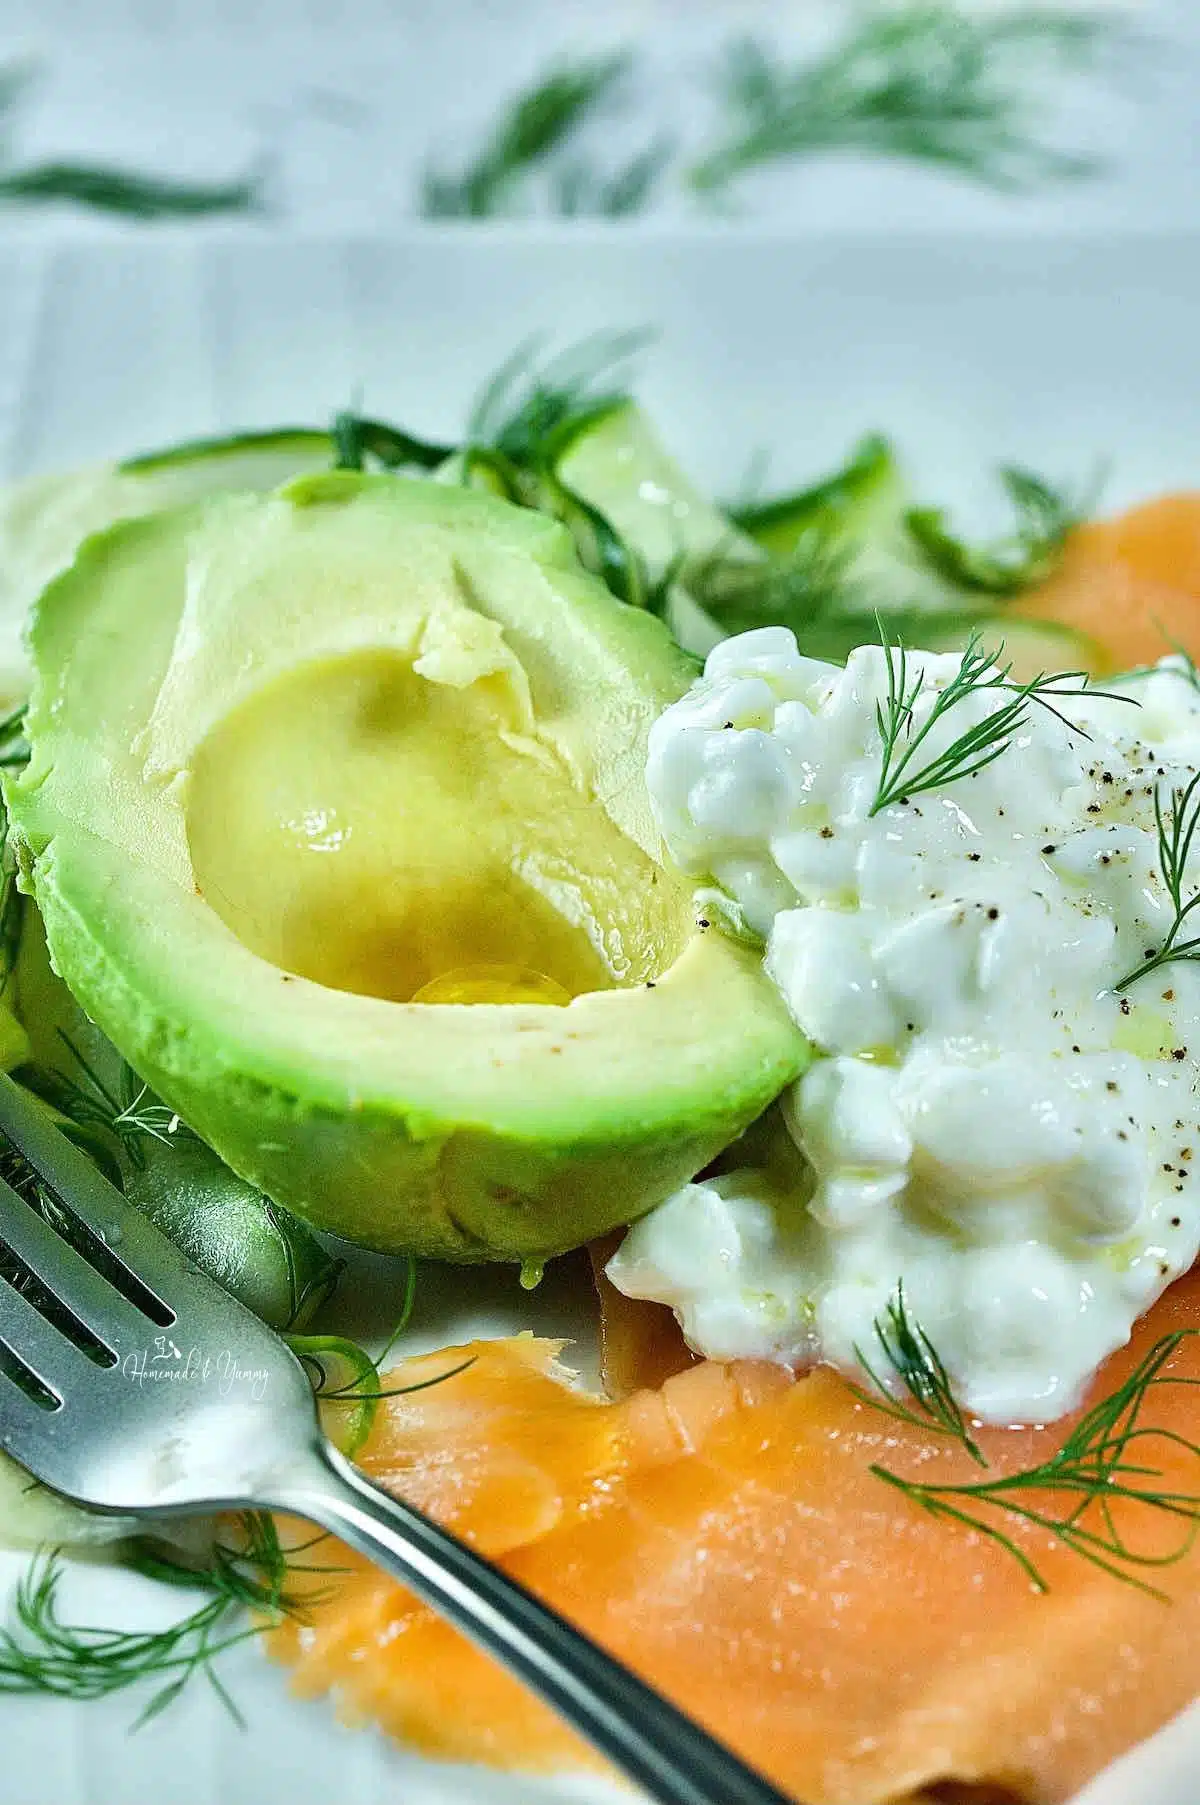 Cold smoked salmon plate for dinner with cottage cheese and avocado.